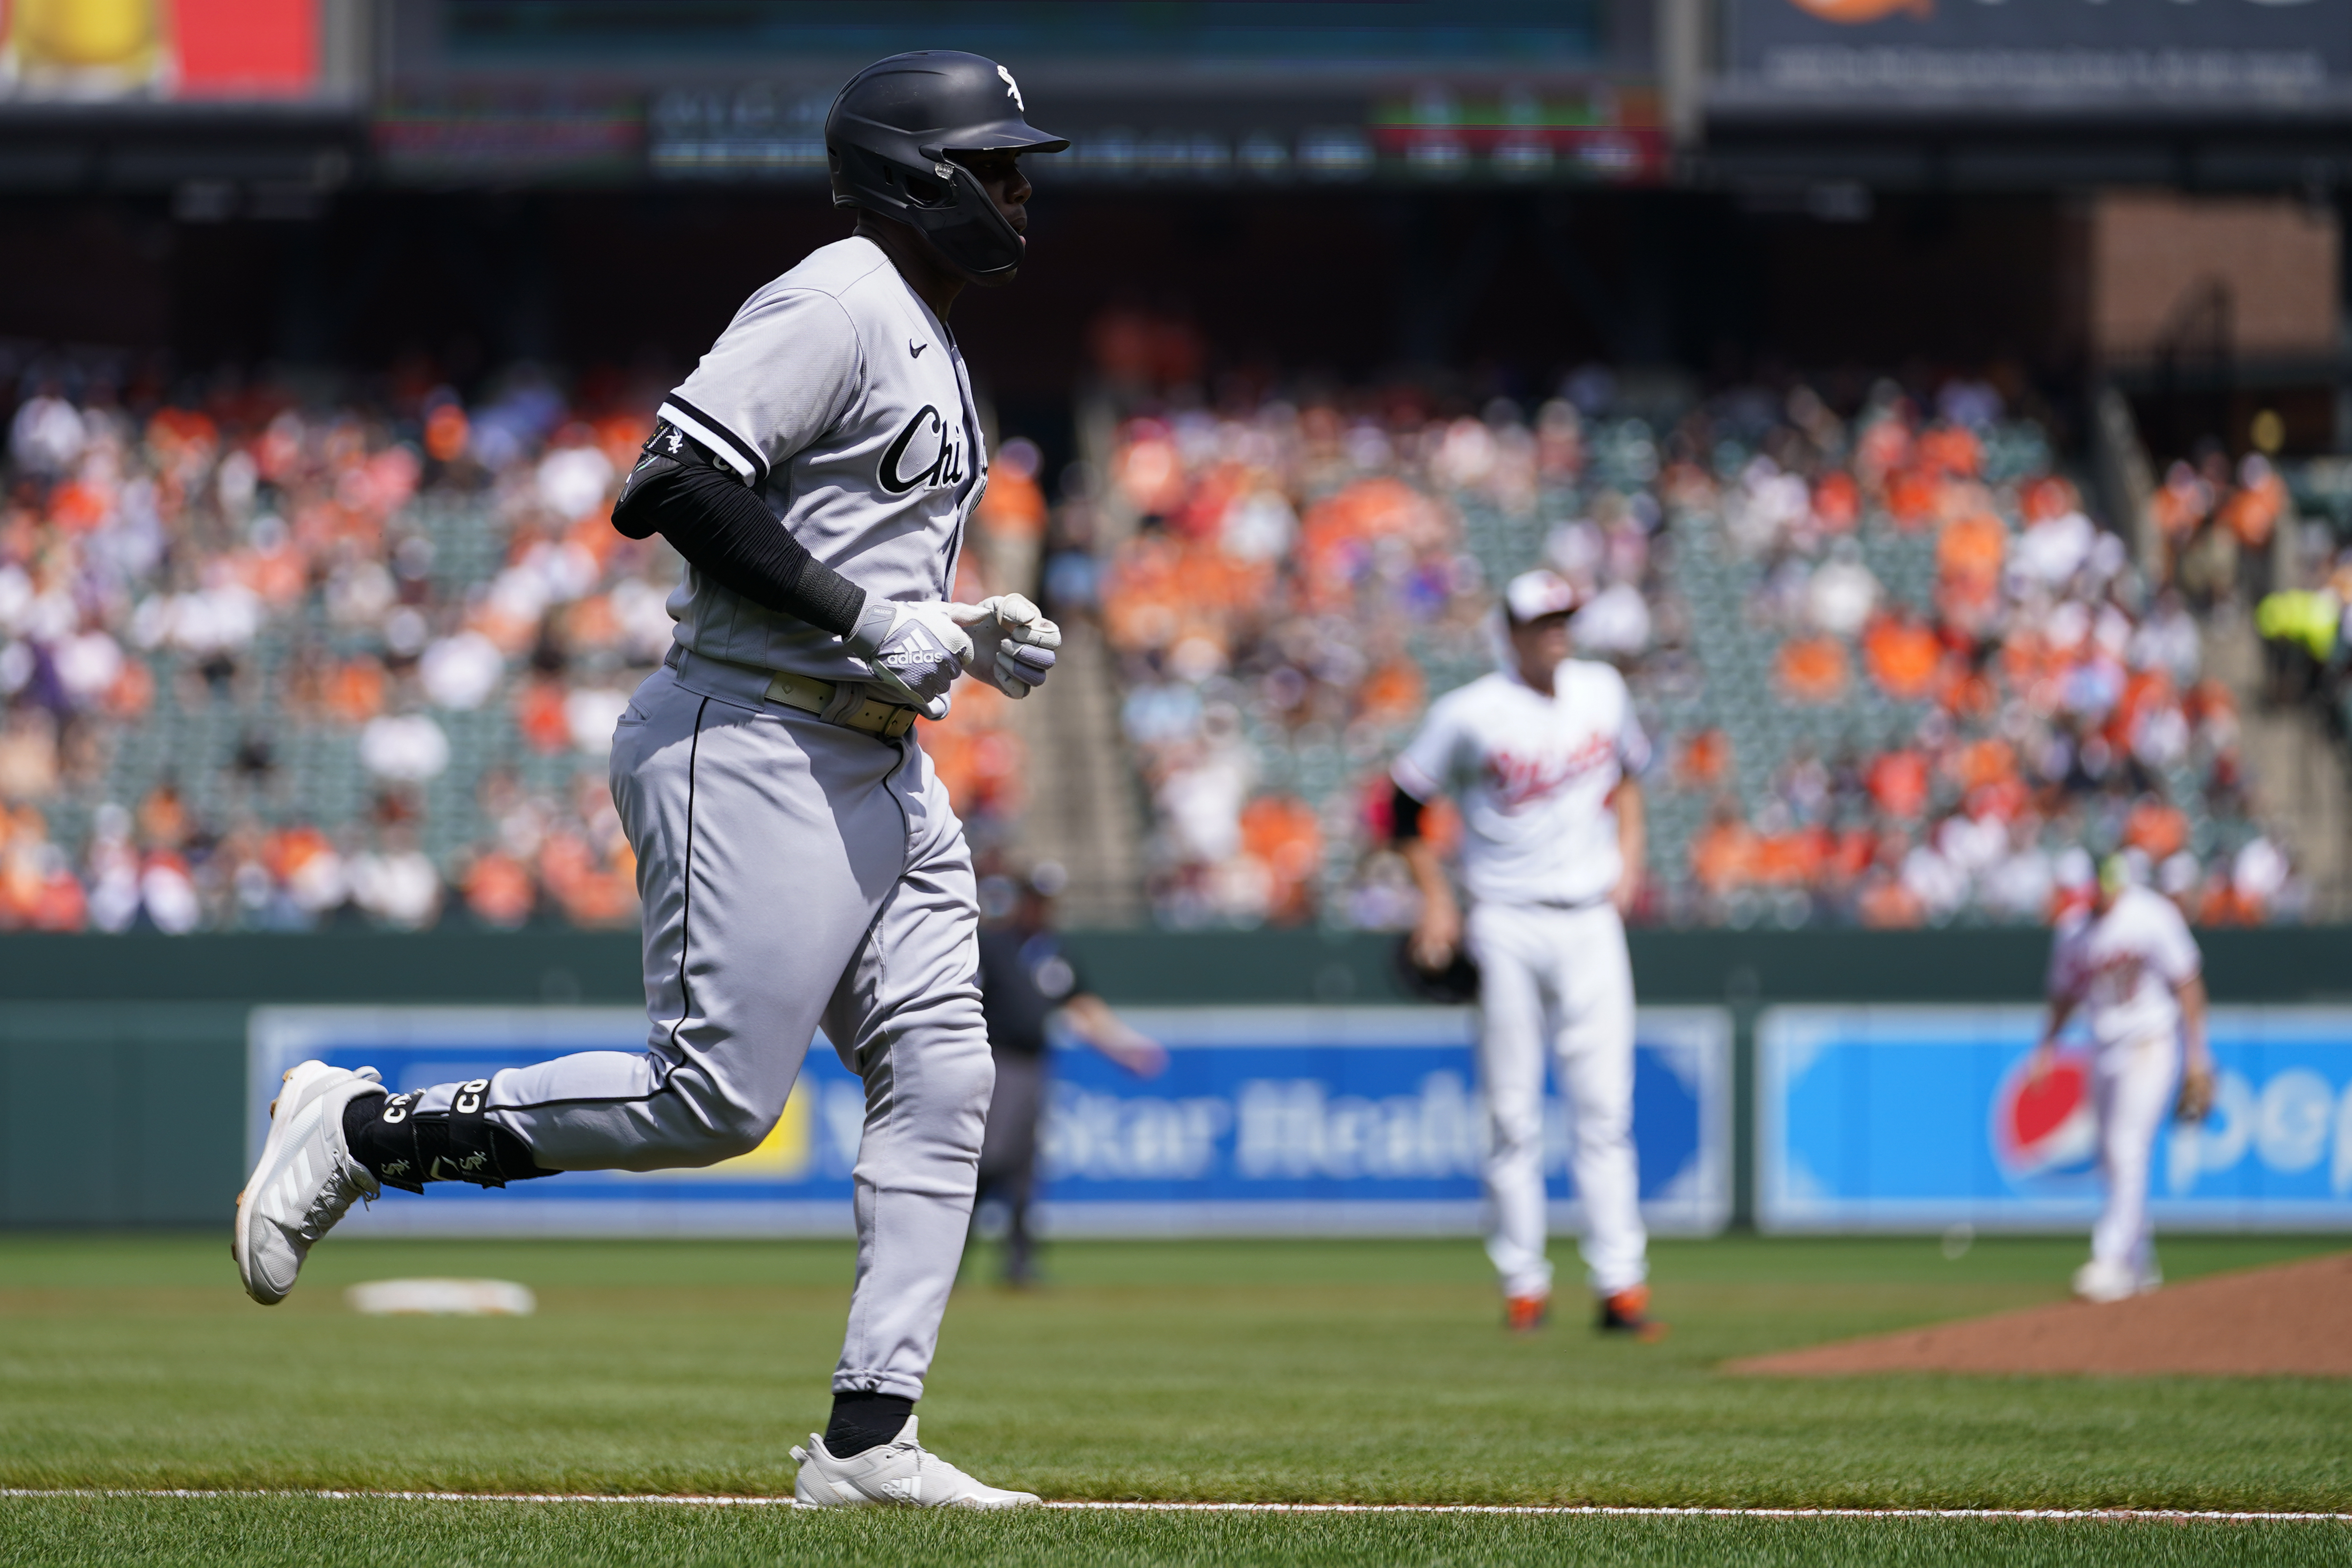 Cease goes 5 innings in debut, White Sox beat Tigers 7-5